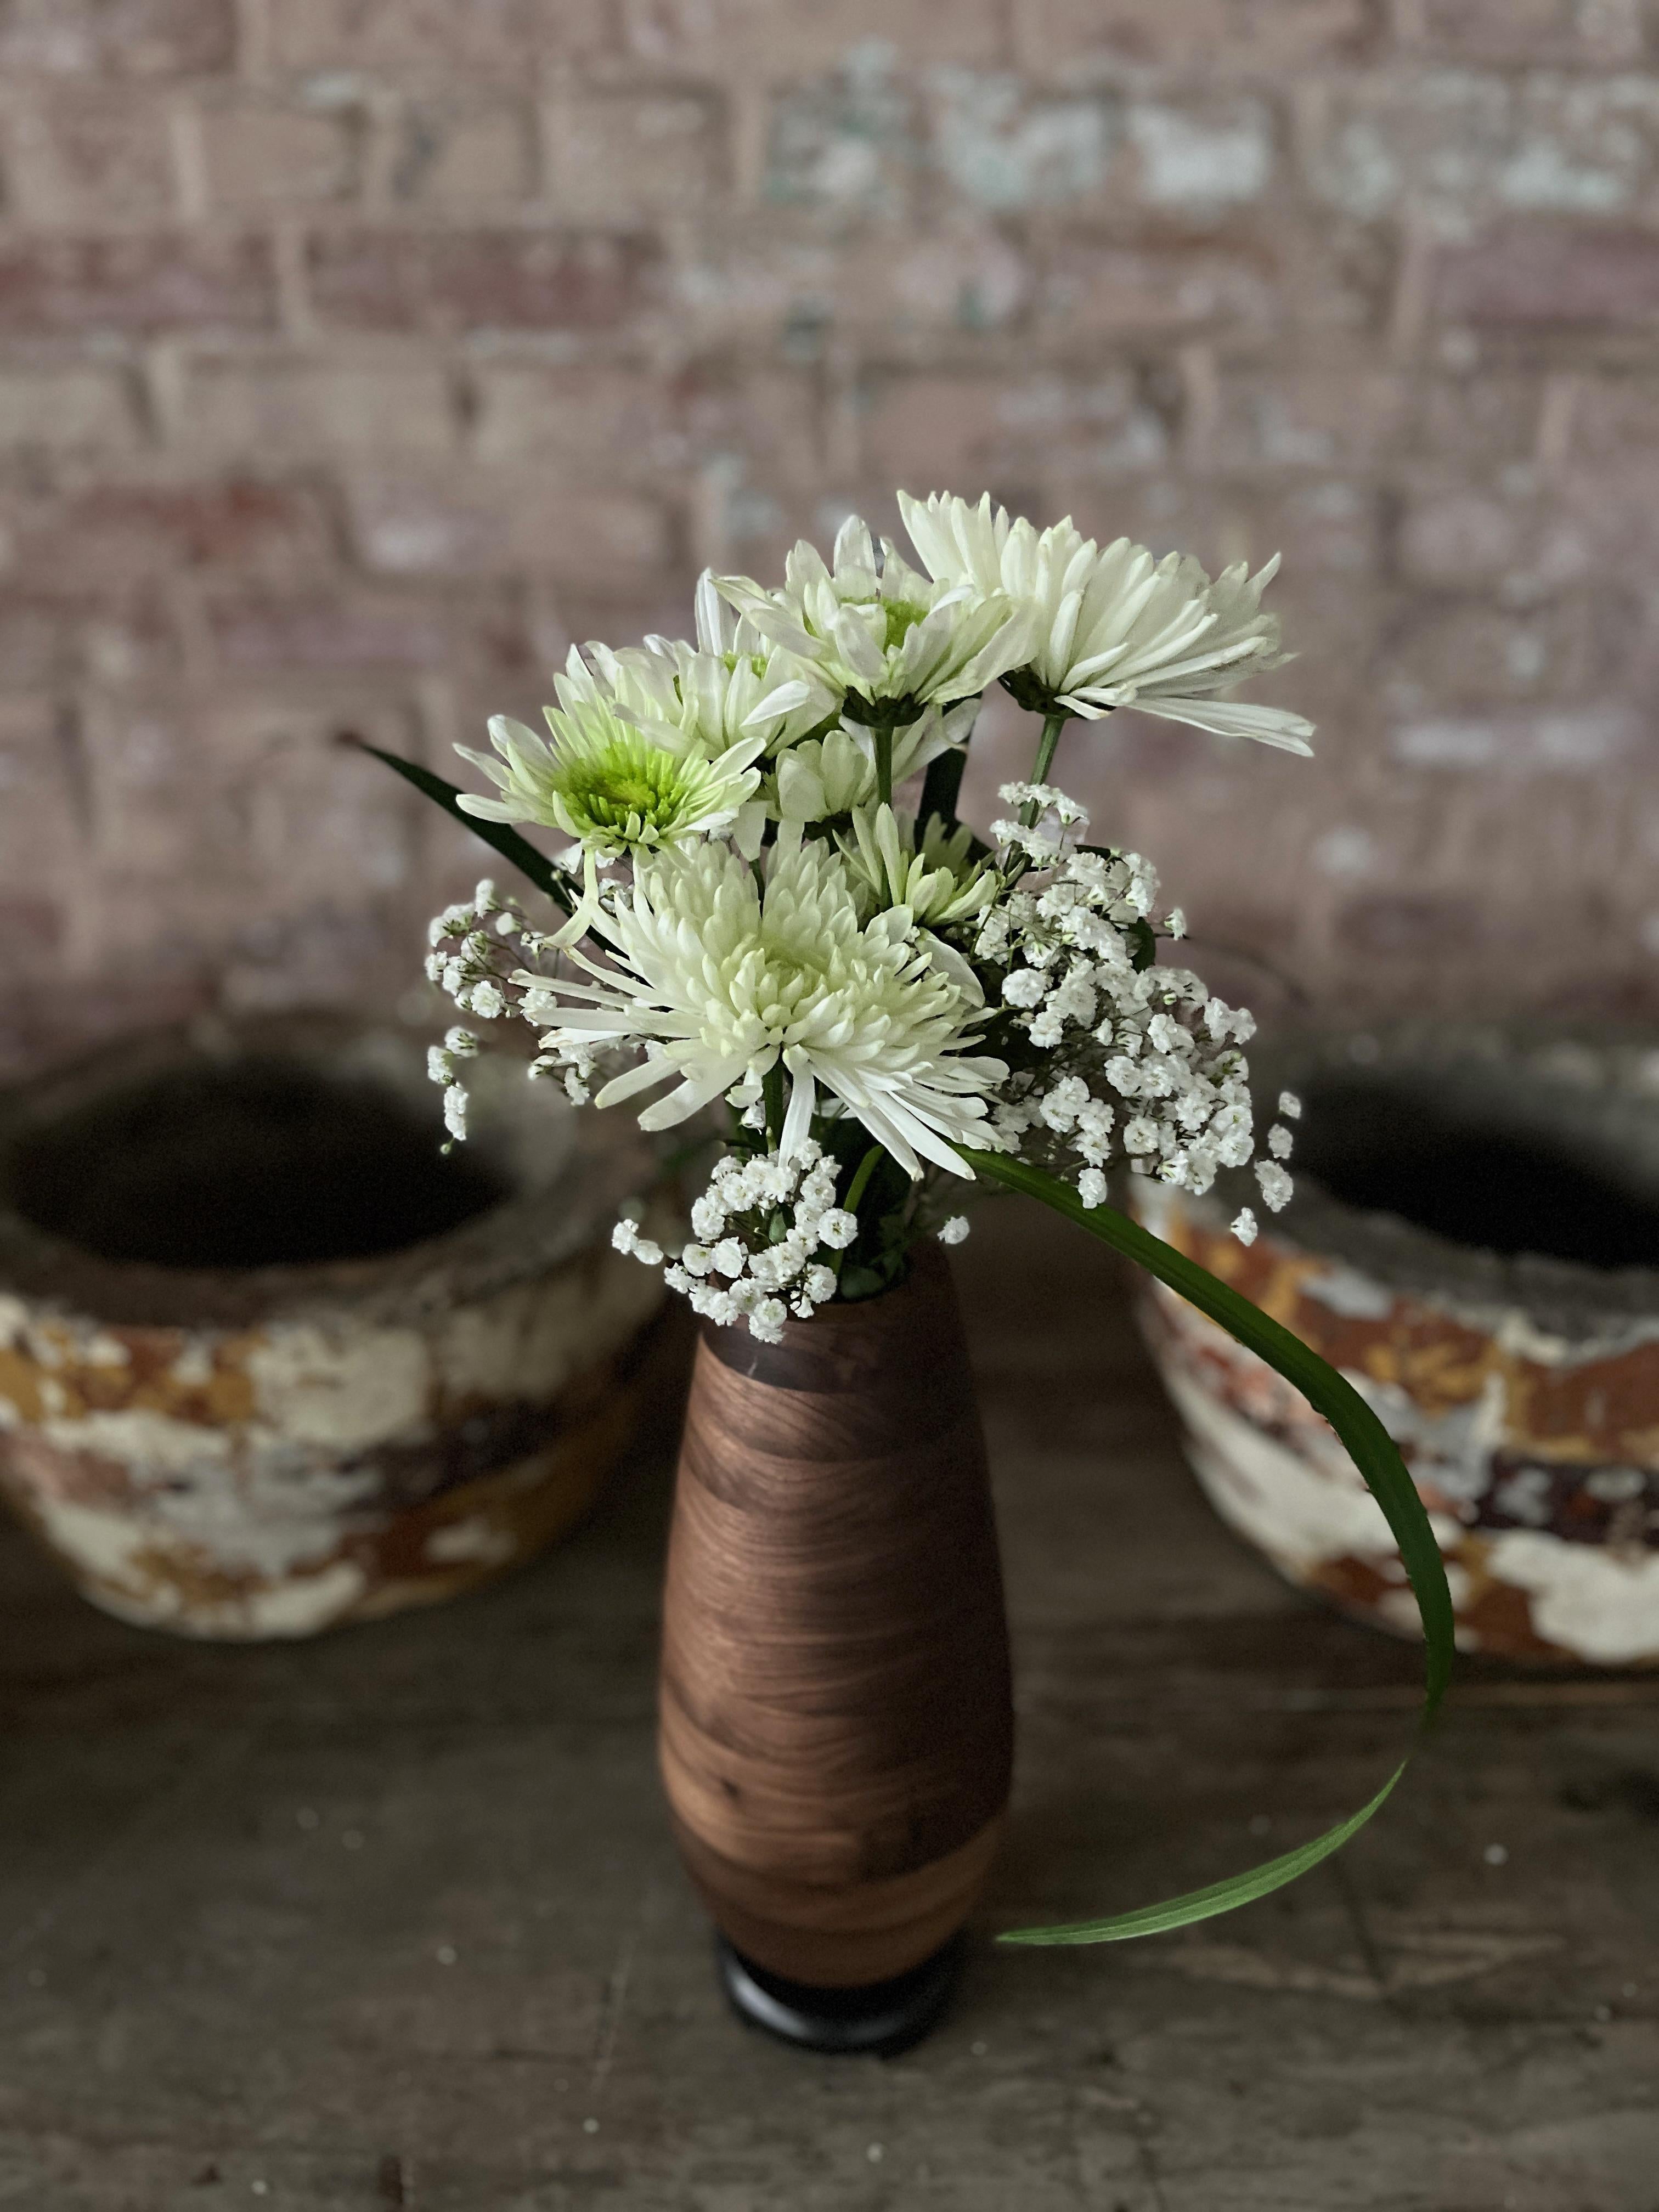 A Wooden Vase with bronze base from Alabama Sawyer is elegant and refined, ready to be integrated into modern context. Glass inserts hold water to nourish and extend the life of your floral creation. A wooden vessel is the perfect touch for your